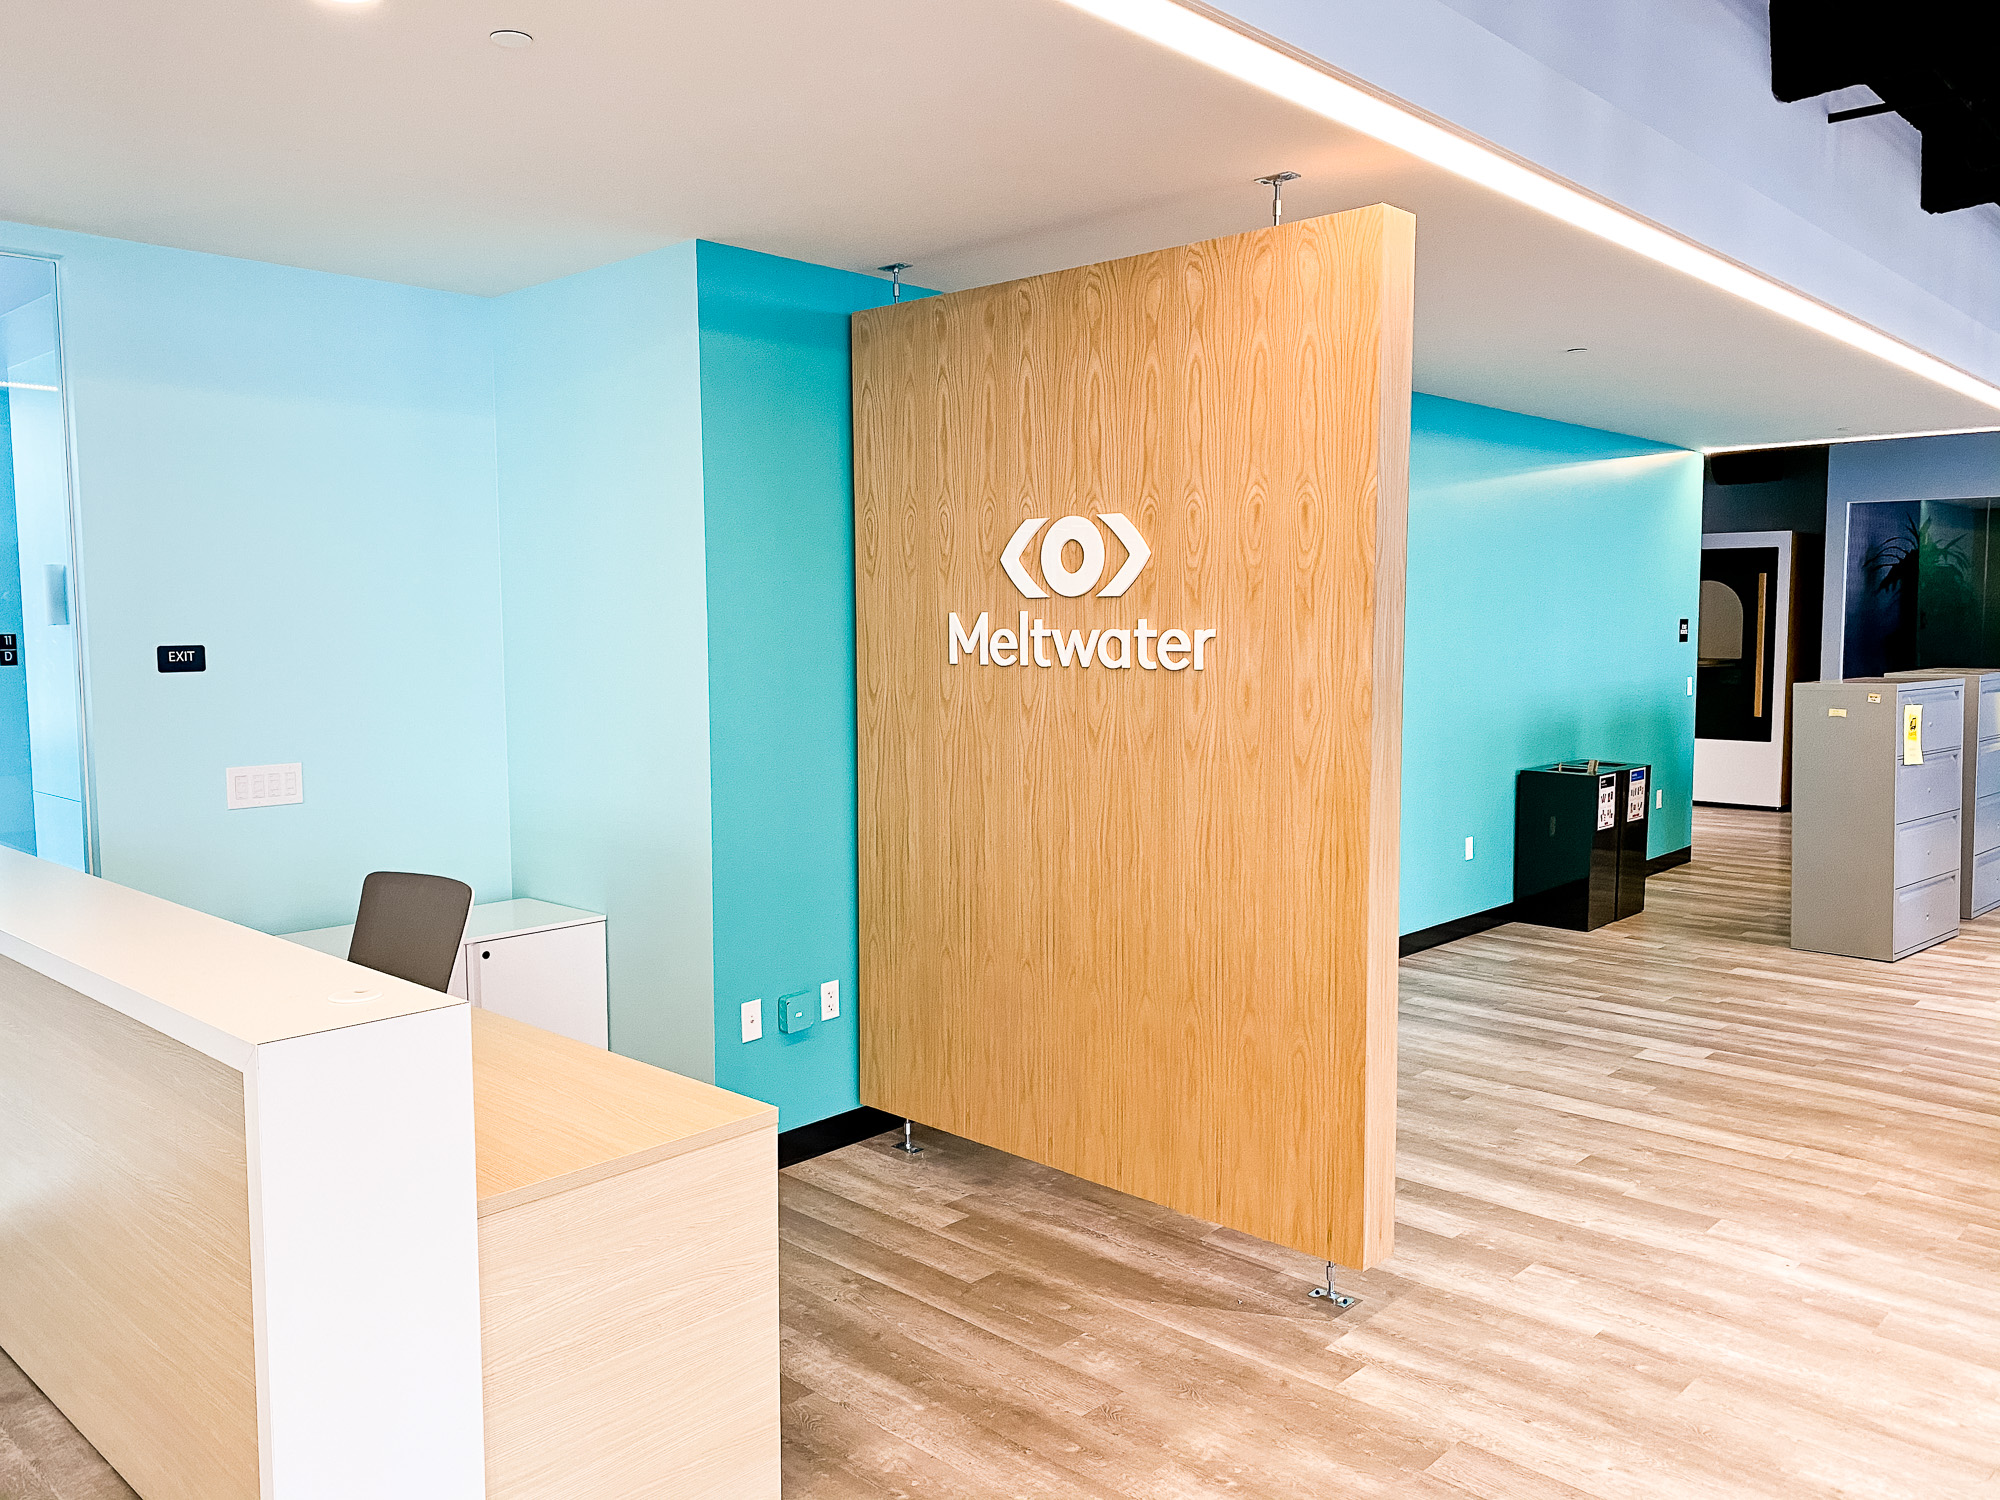 White logo on light wood add-on divider wall for the San Francisco office of Meltwater, a software as a service company that develops and markets media monitoring and business intelligence software.